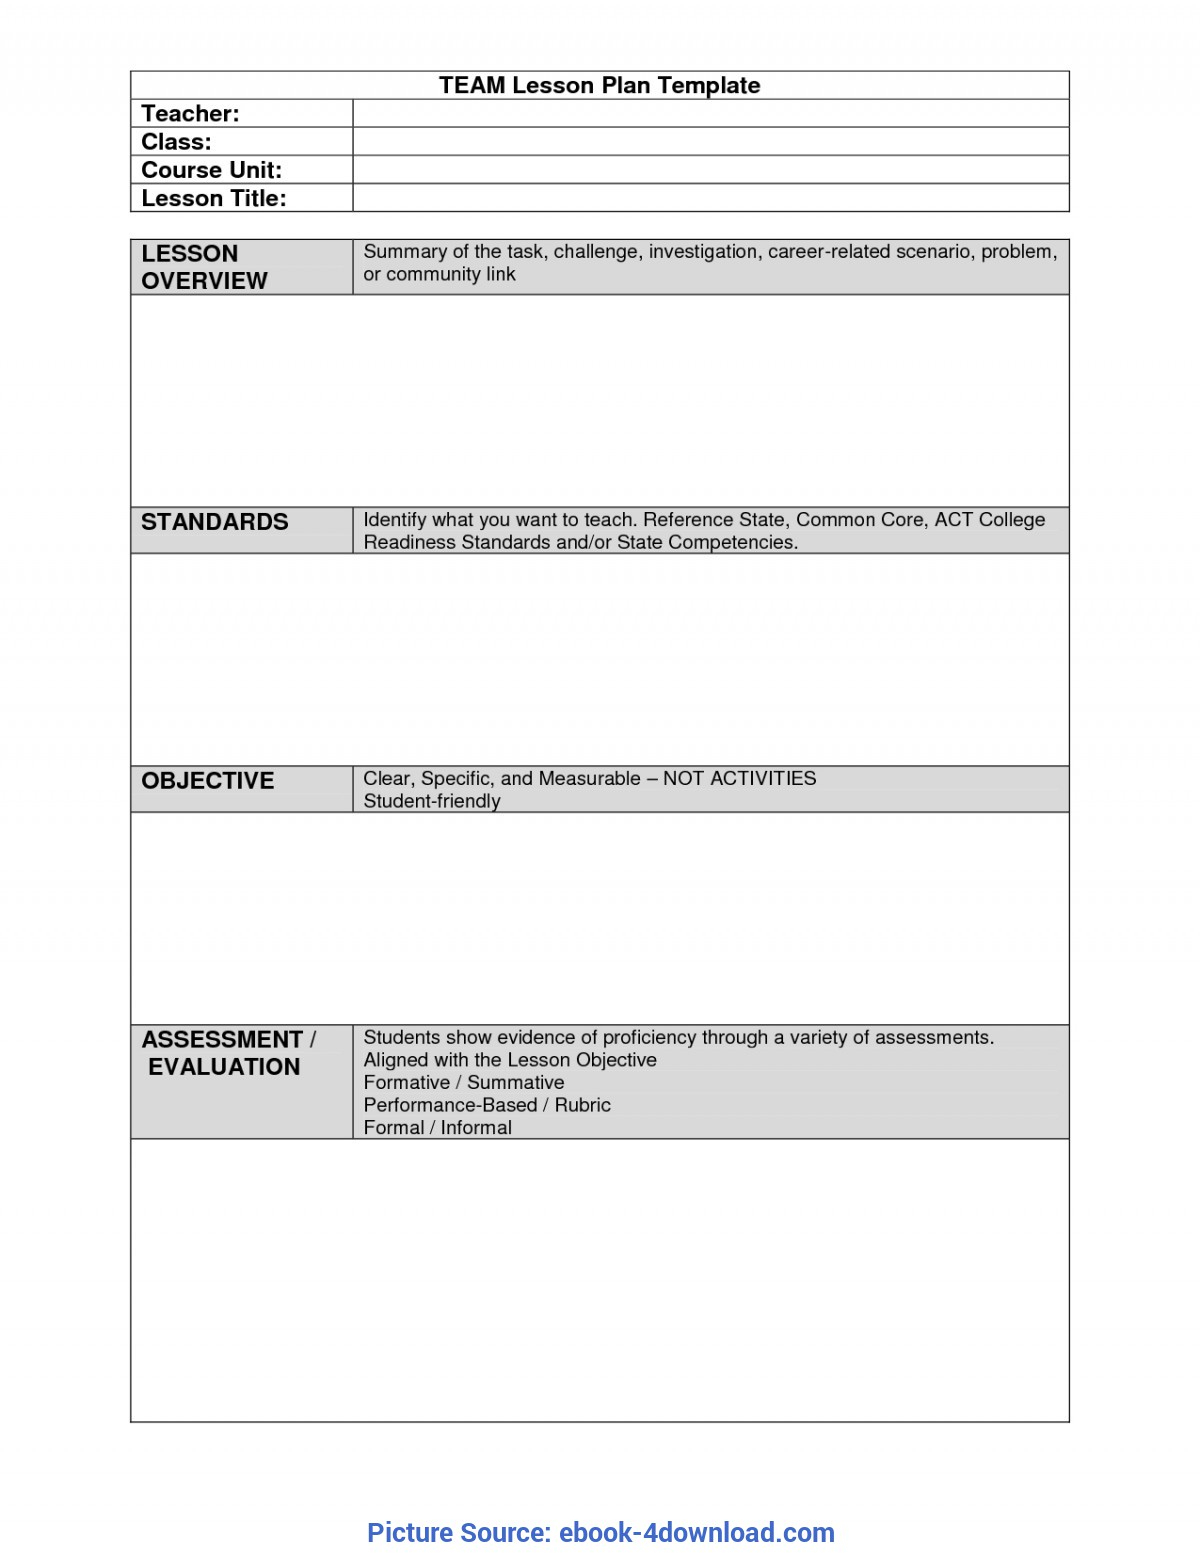 Madeline Hunter Lesson Plan Template Twiroo Com | Lesso Pertaining To Madeline Hunter Lesson Plan Blank Template